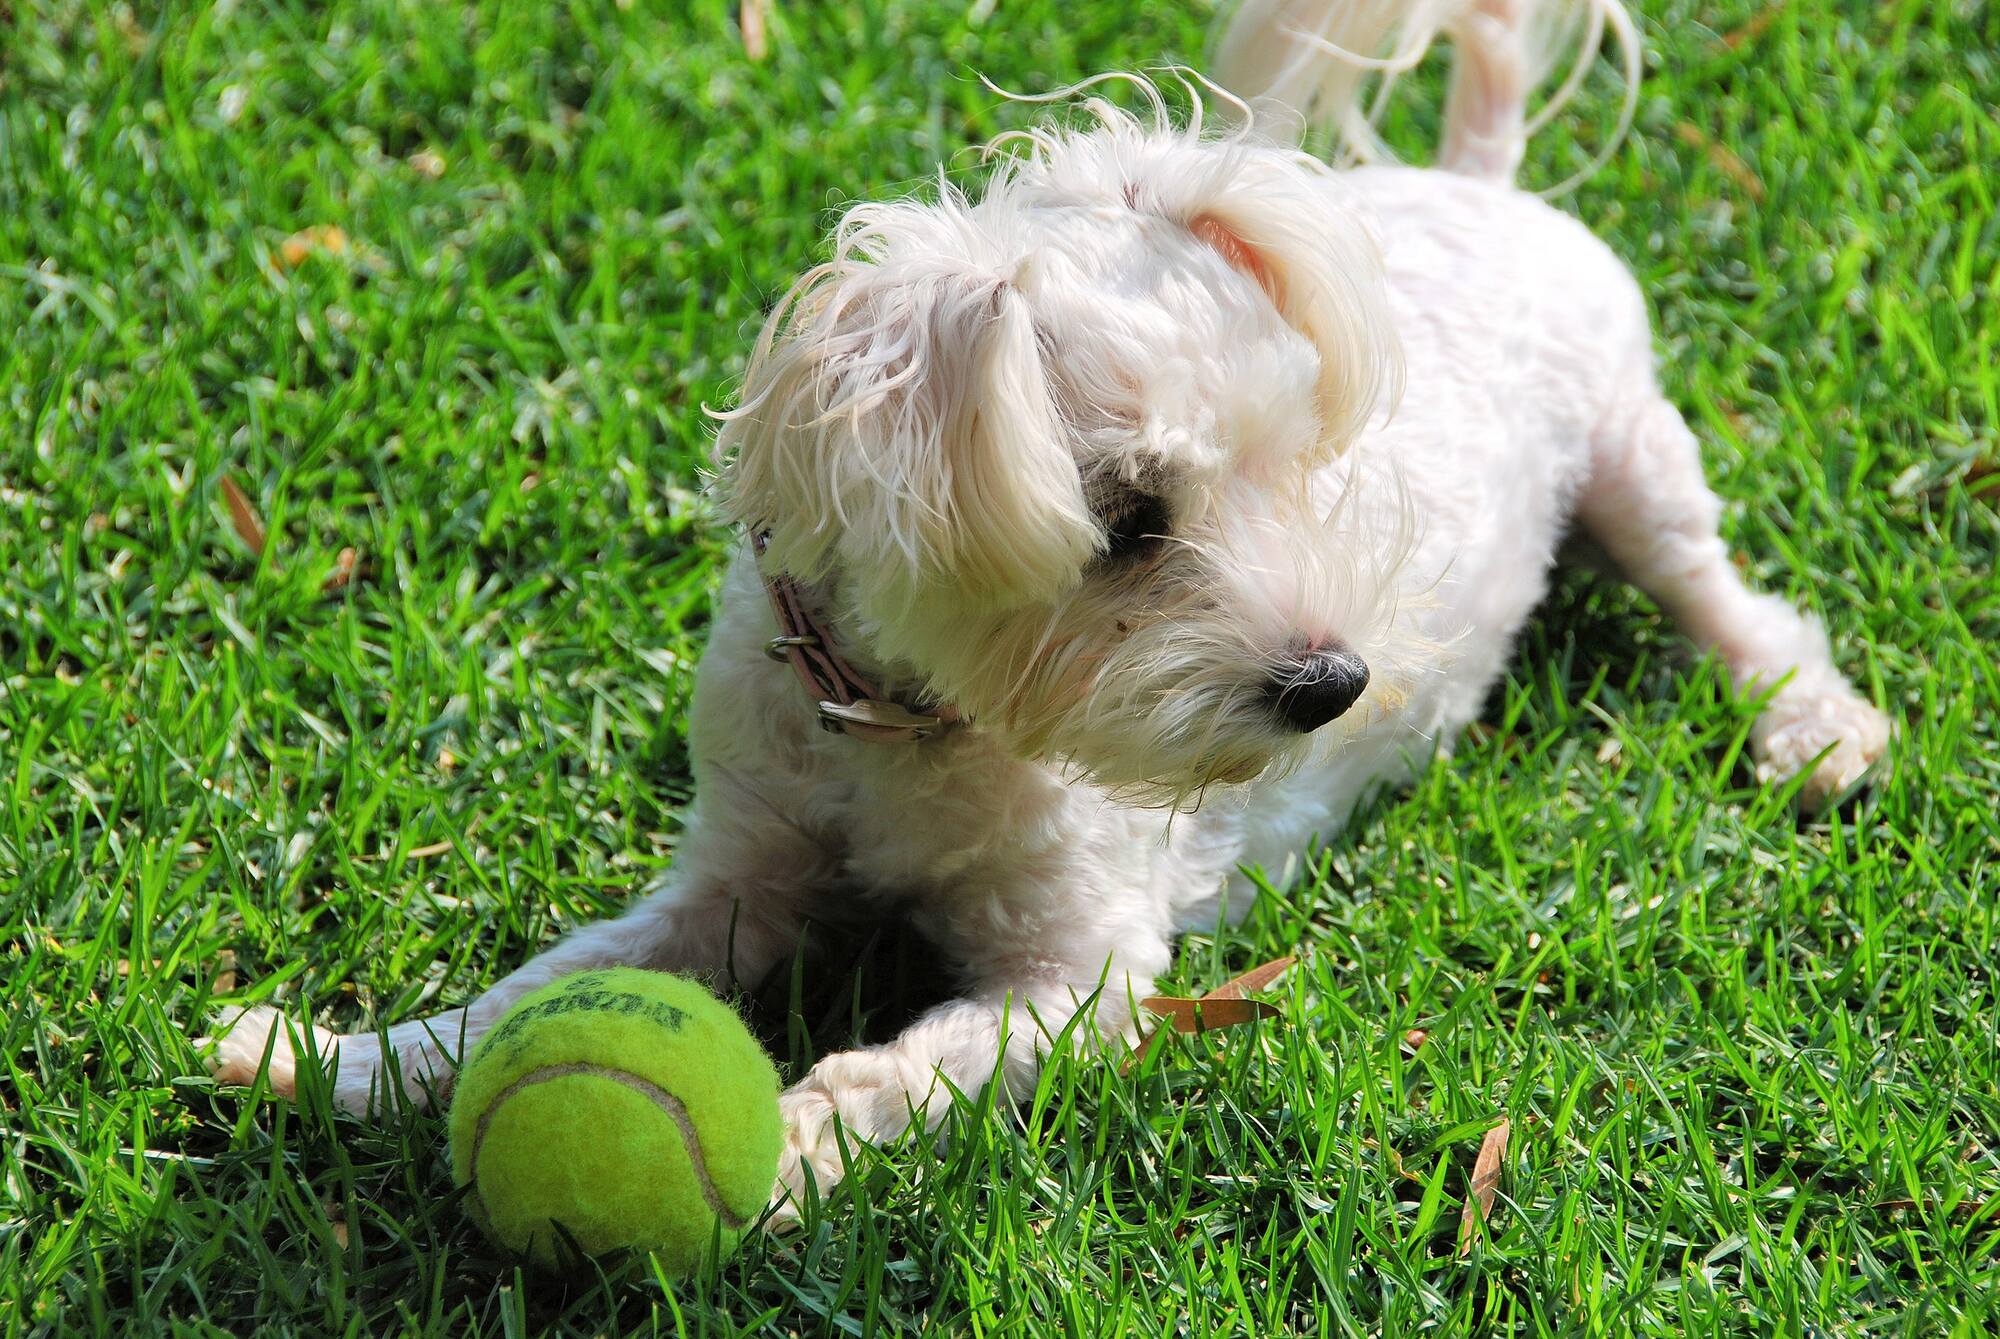 Photograph of a small white dog laying in the grass with a yellow tennis ball near its front paws. The dog looks alert and playful.